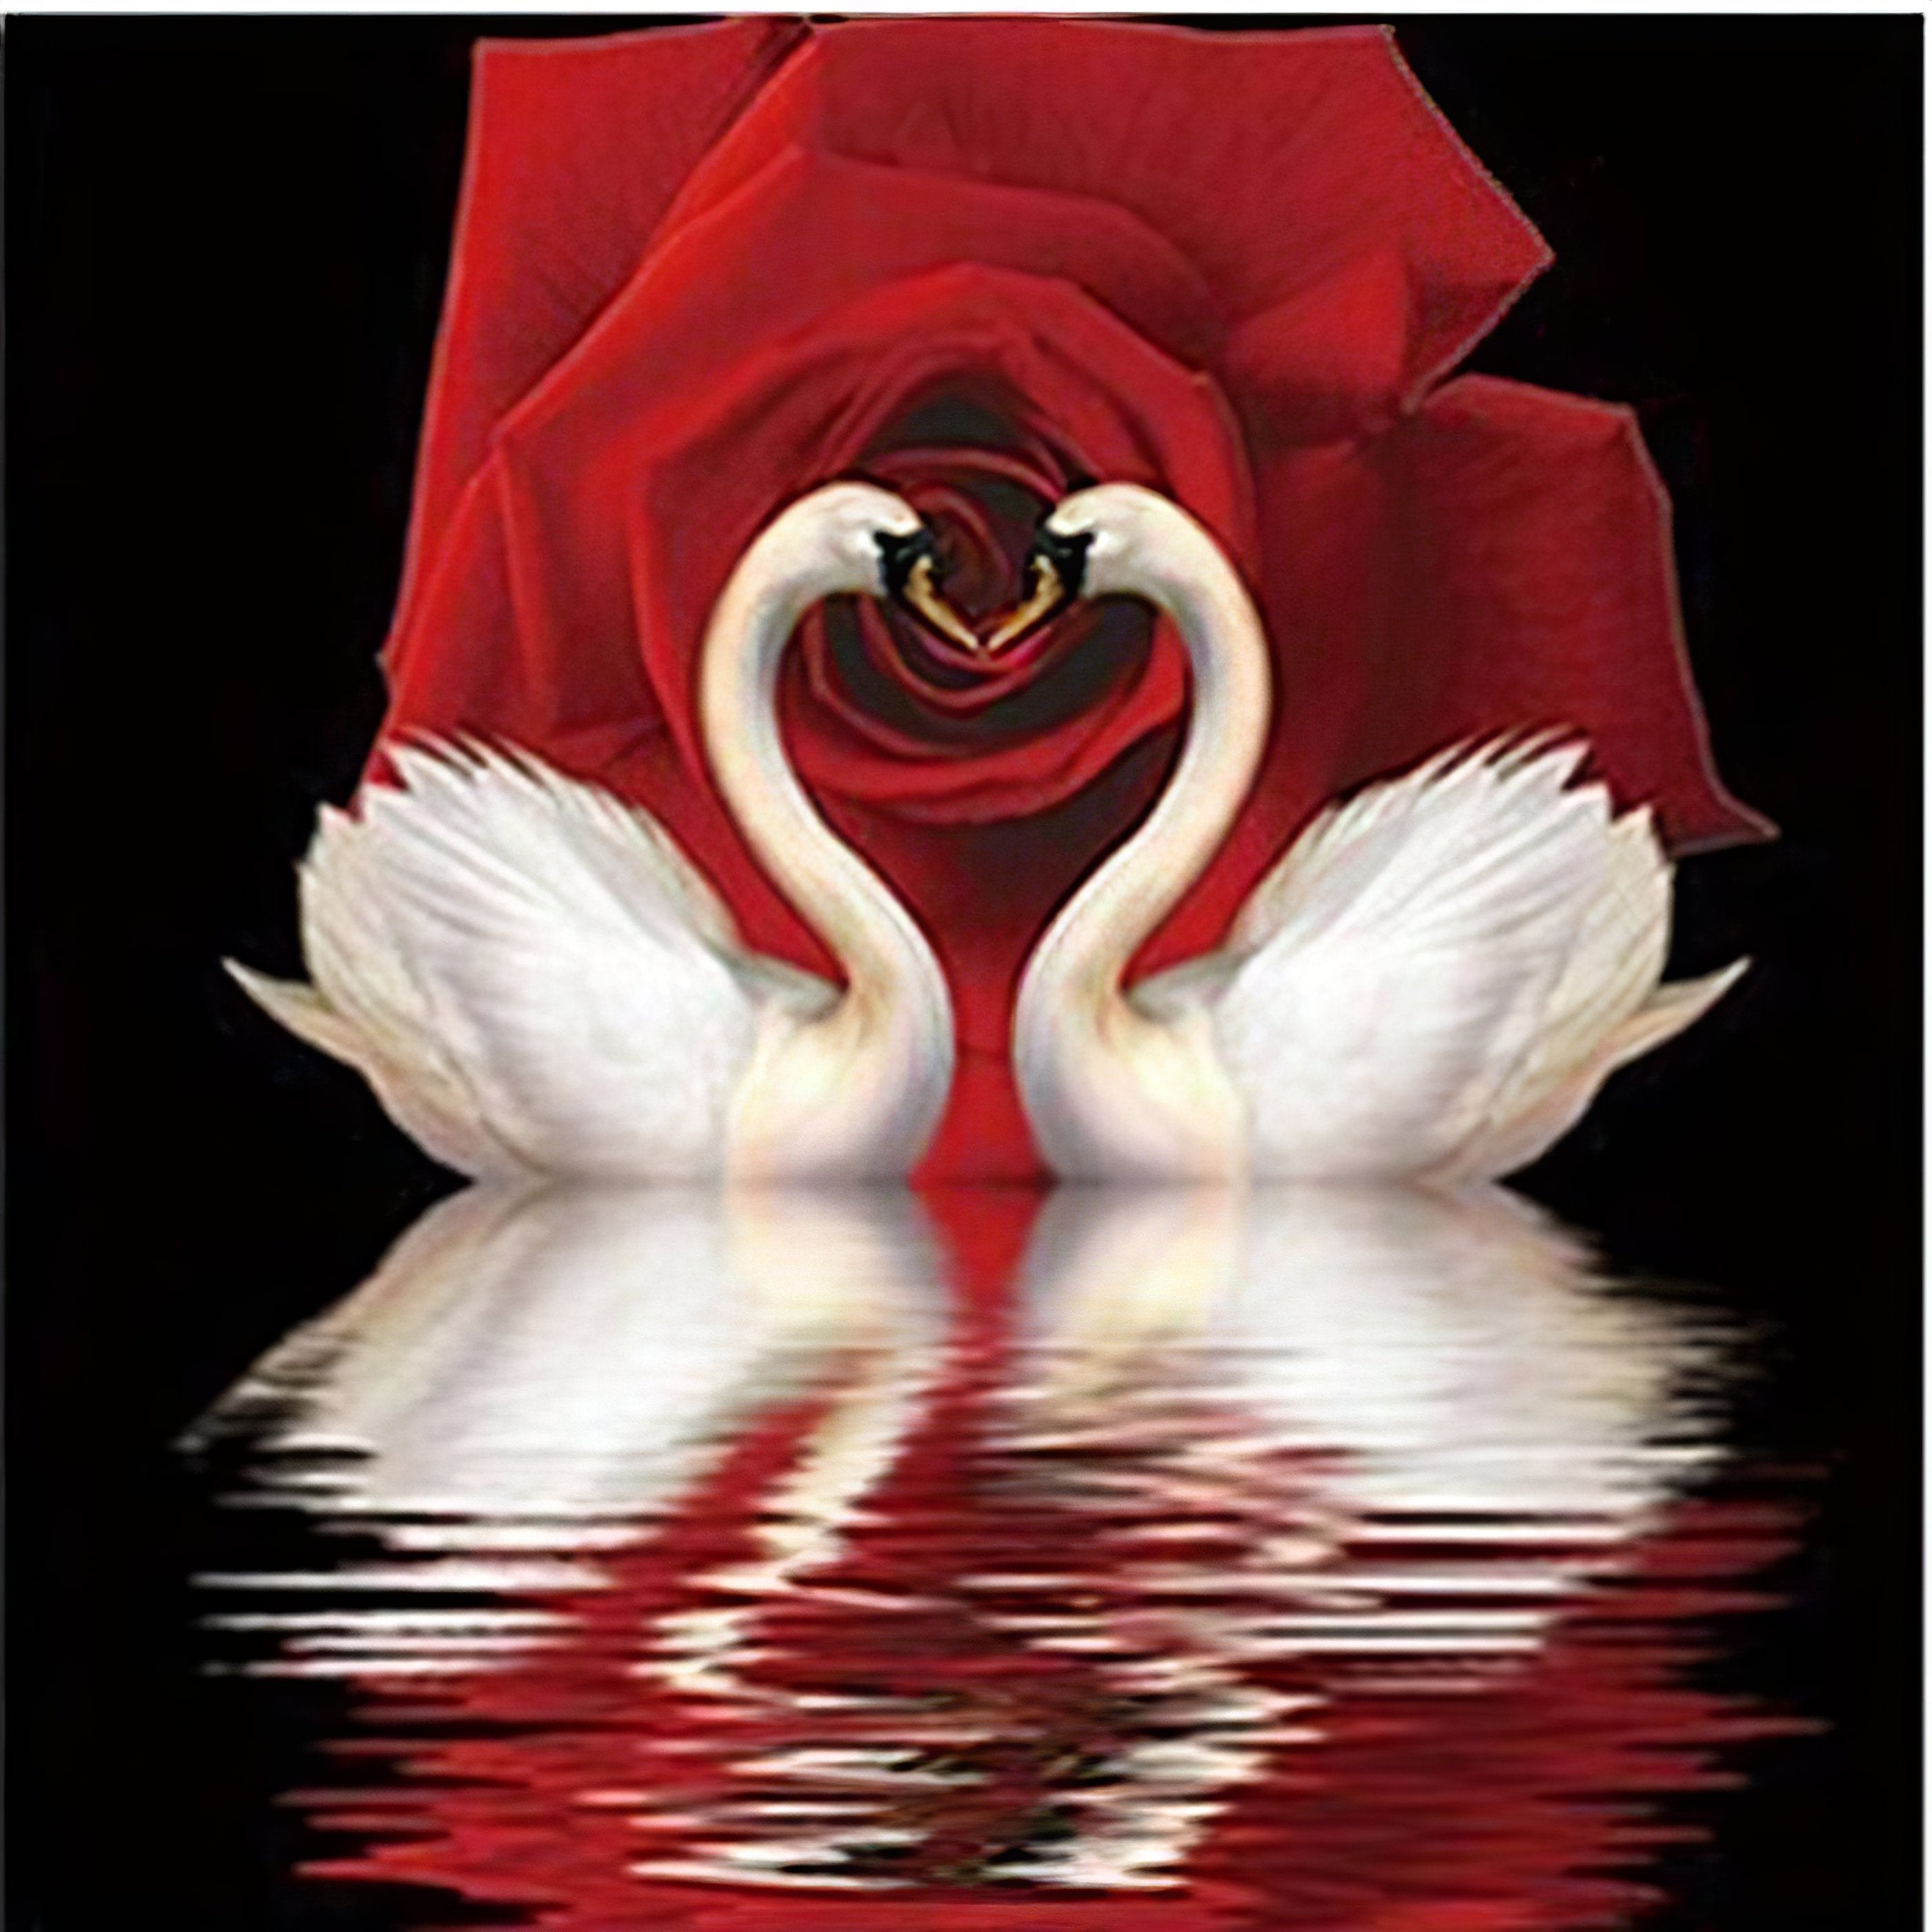 Witness the elegance of a swan among floating roses, creating a scene of serene beauty.Rose And Swan - Diamondartlove